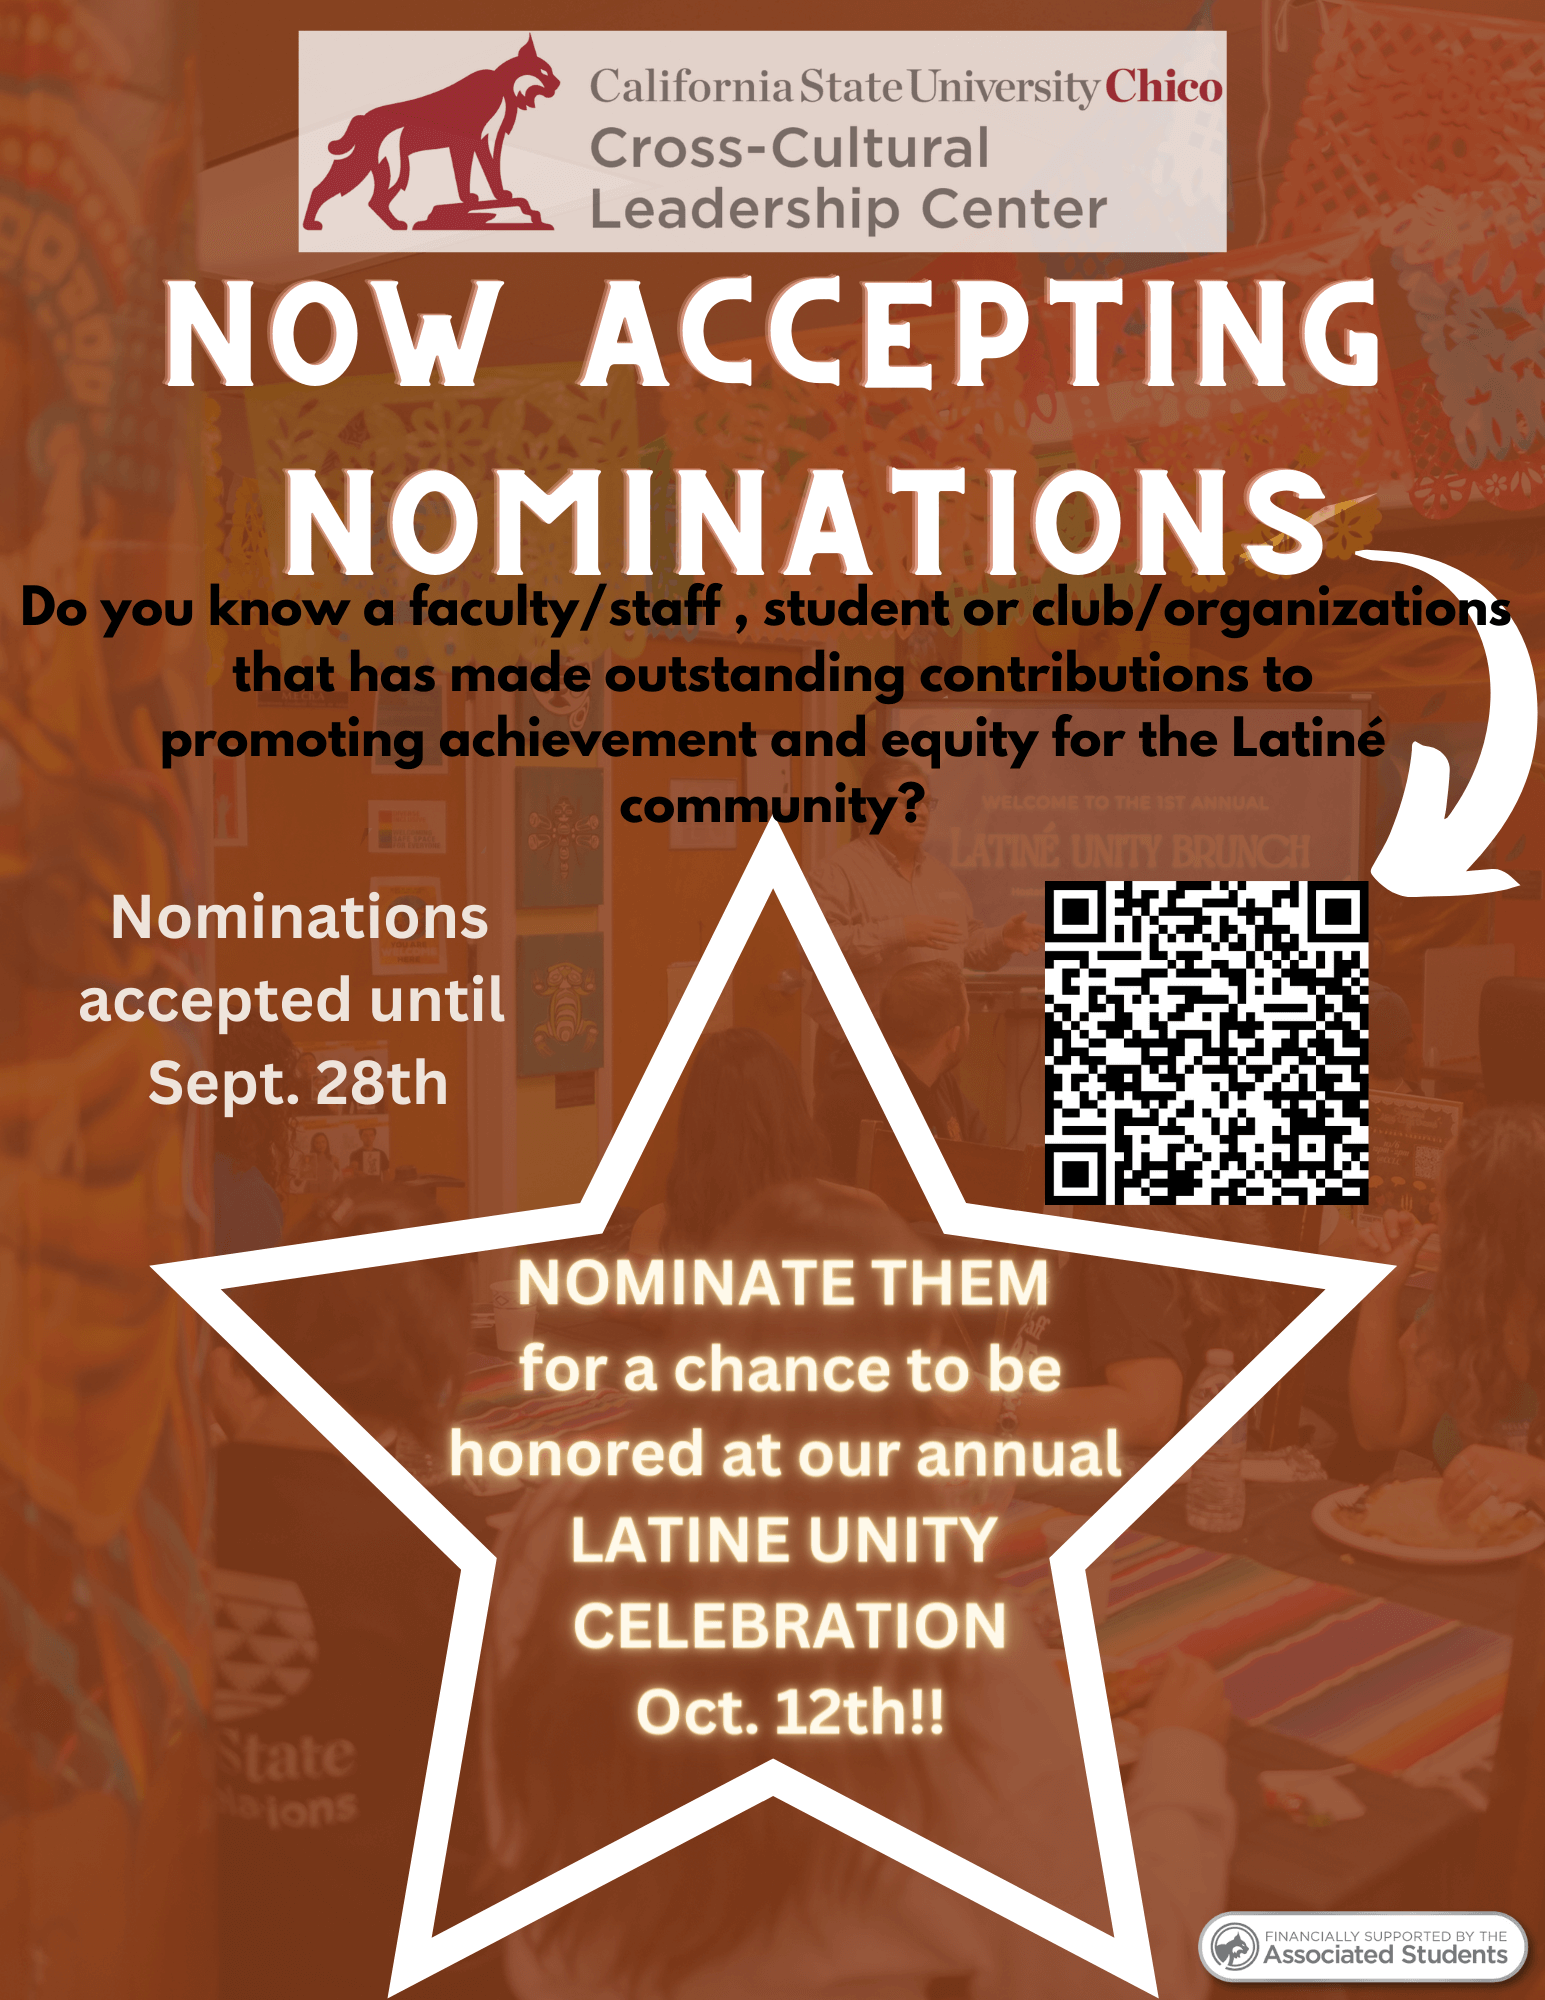 Latine Unity Celebration Nominations are Open until Sept. 28th.